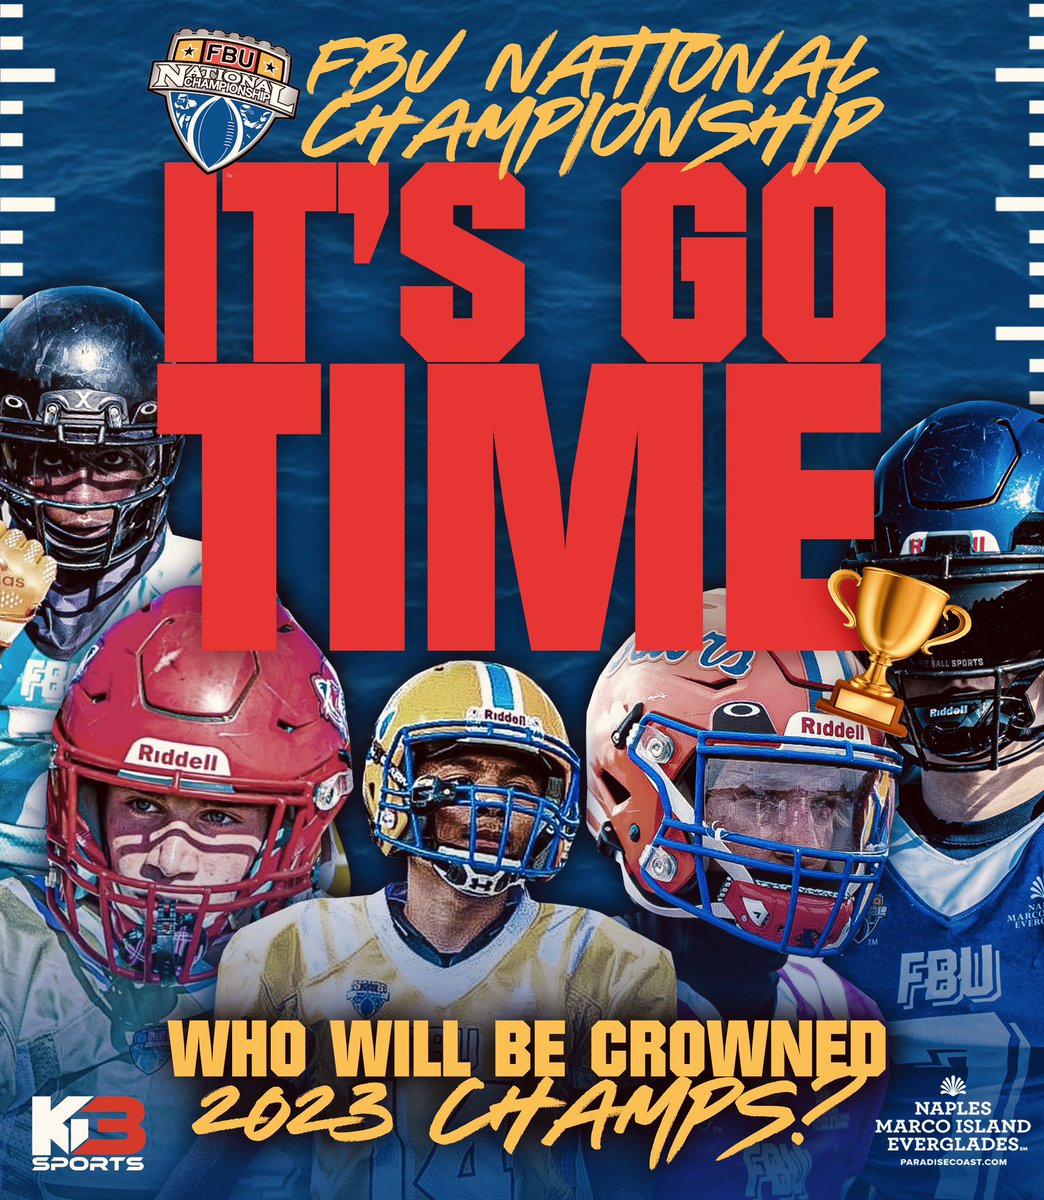 IT’S GO TIME 🏆🔥 The 2023 FBU National Championship kicks off IN 24 HOURS 👀 Who will be crowned 2023 Champs? 🧐 TIME TO FIND OUT 😤 #FBU #FBUNC #PathToNaples